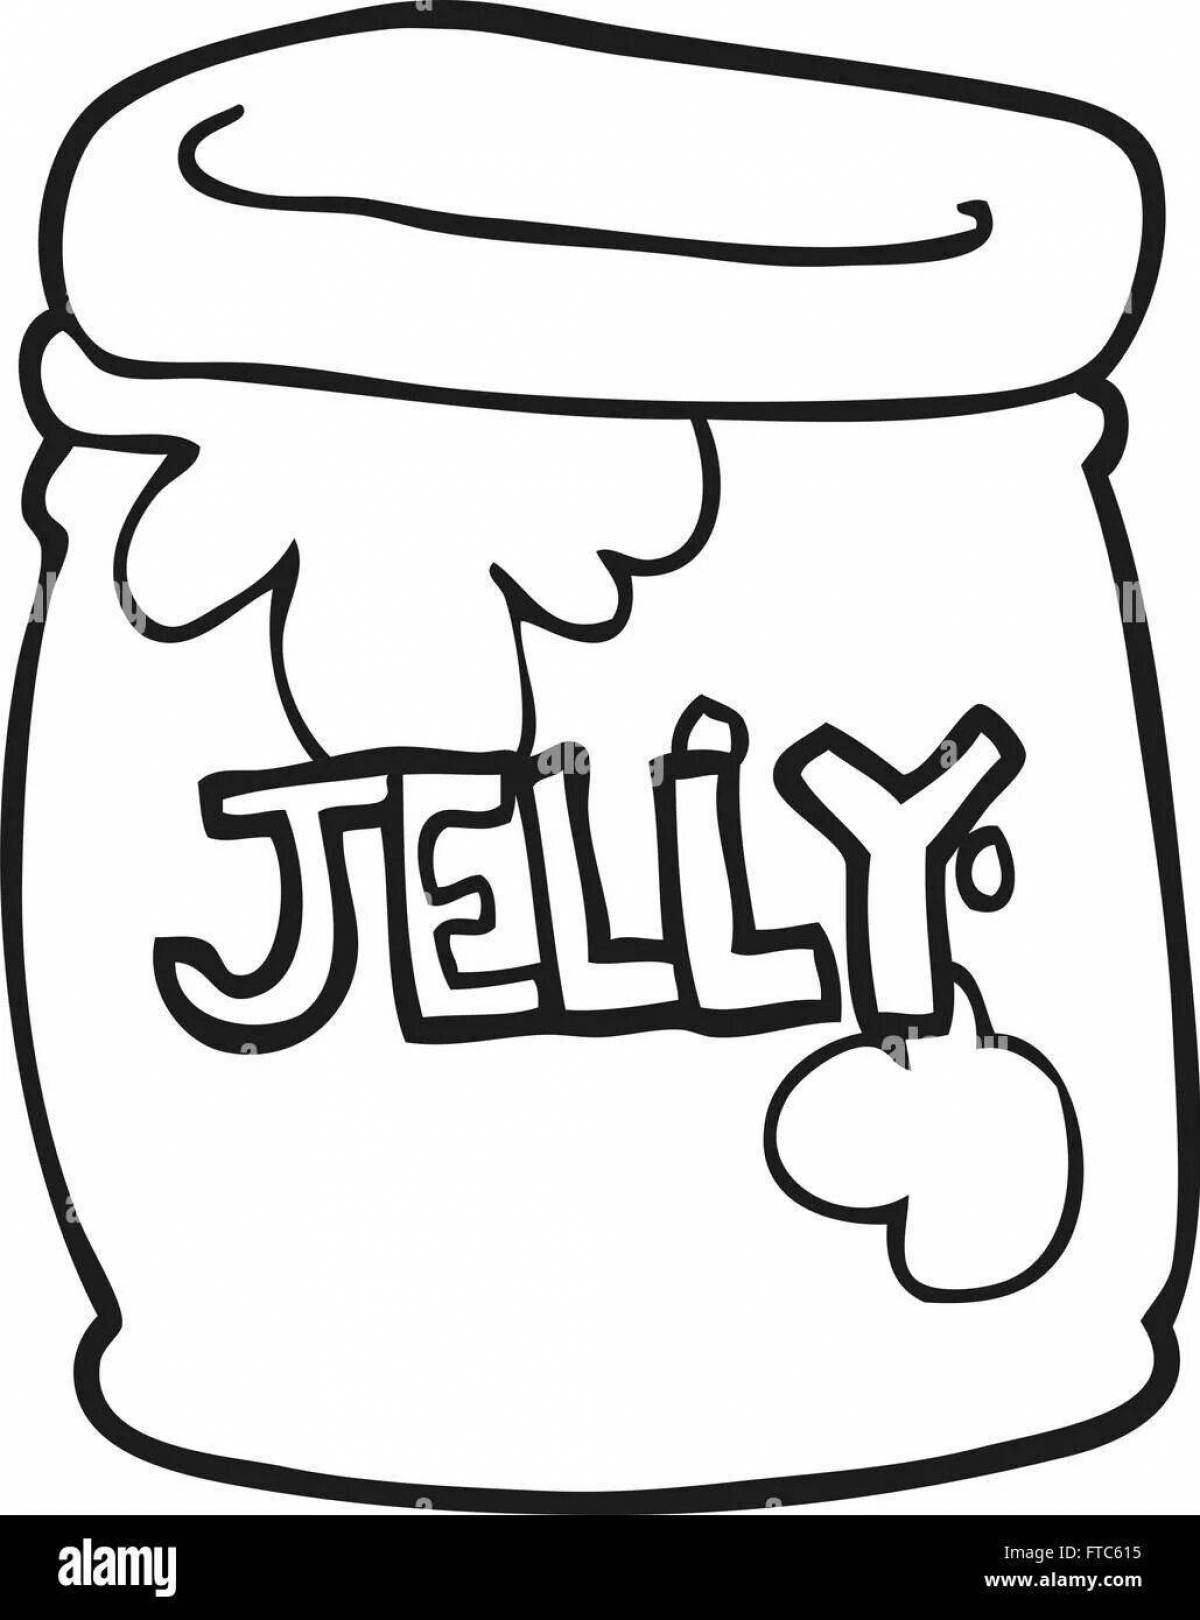 Bright jelly coloring book for kids